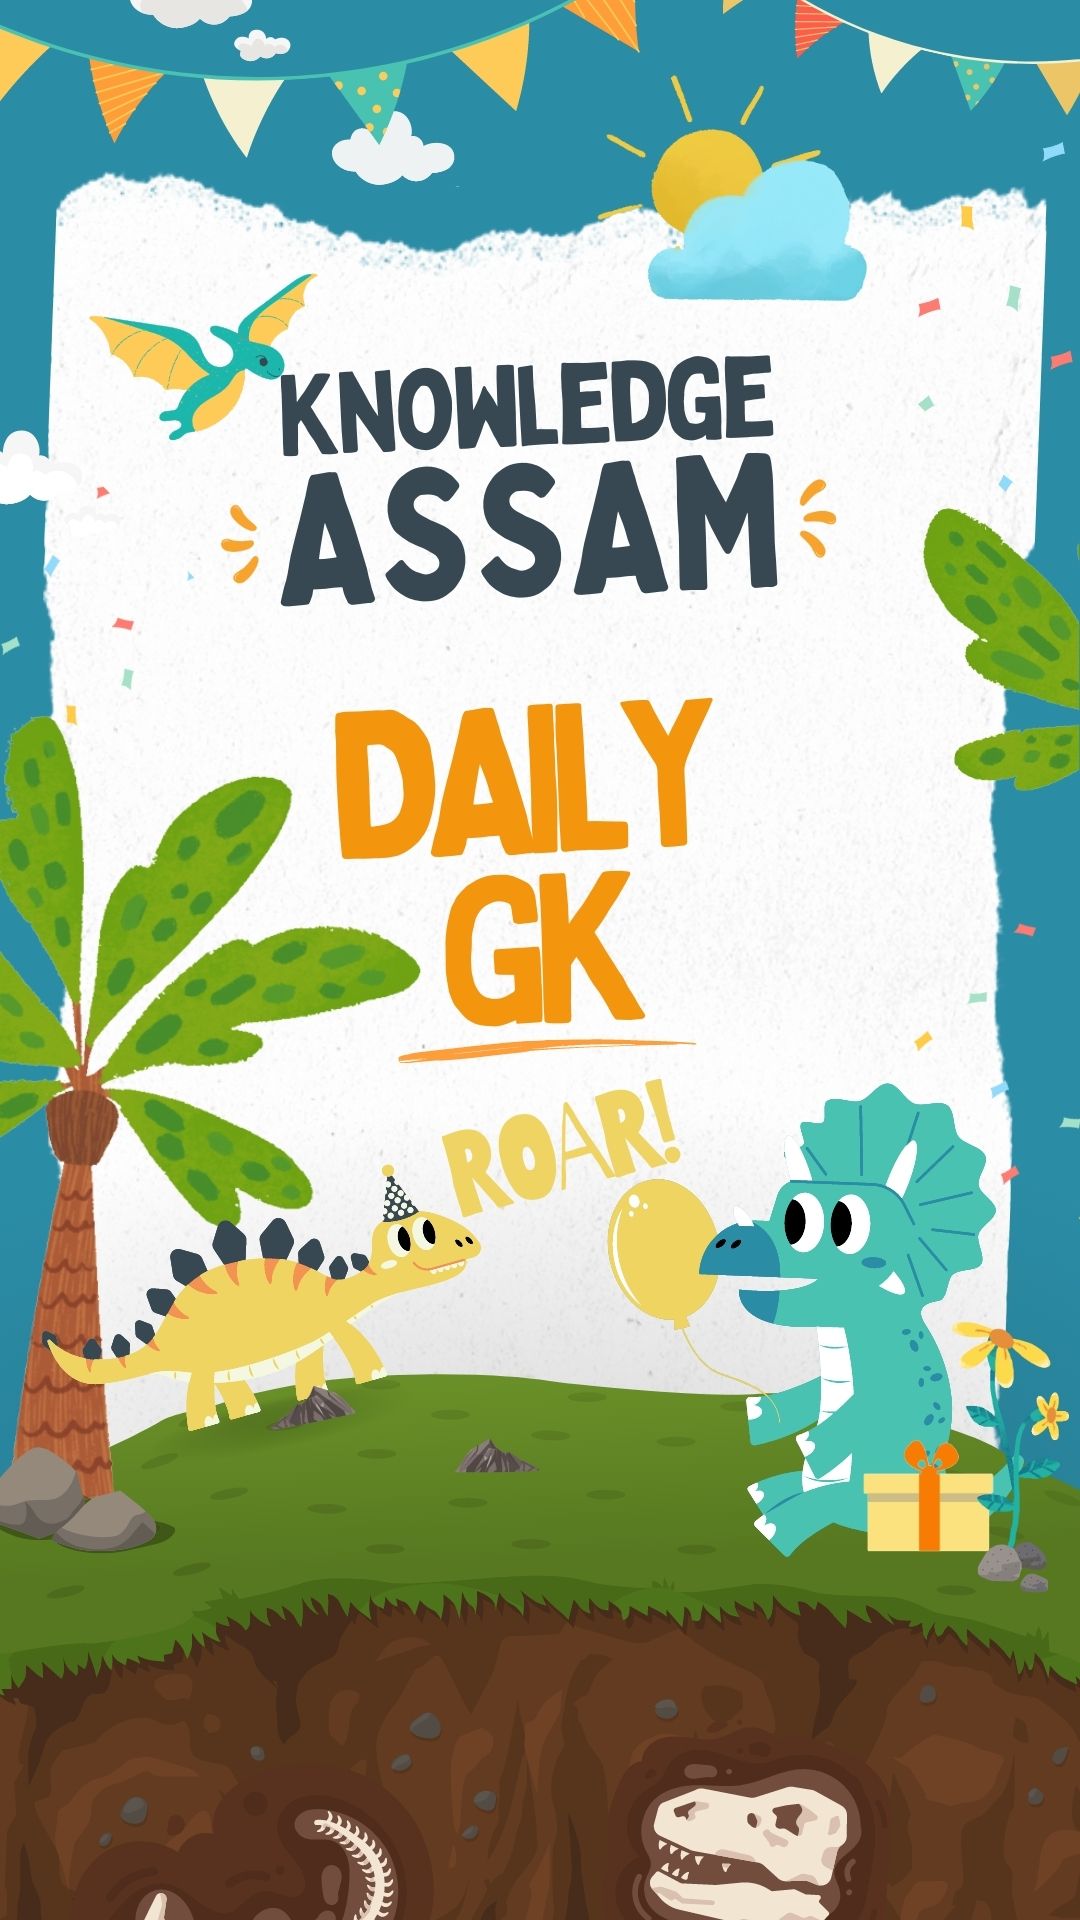 Daily GK - knowledge assam